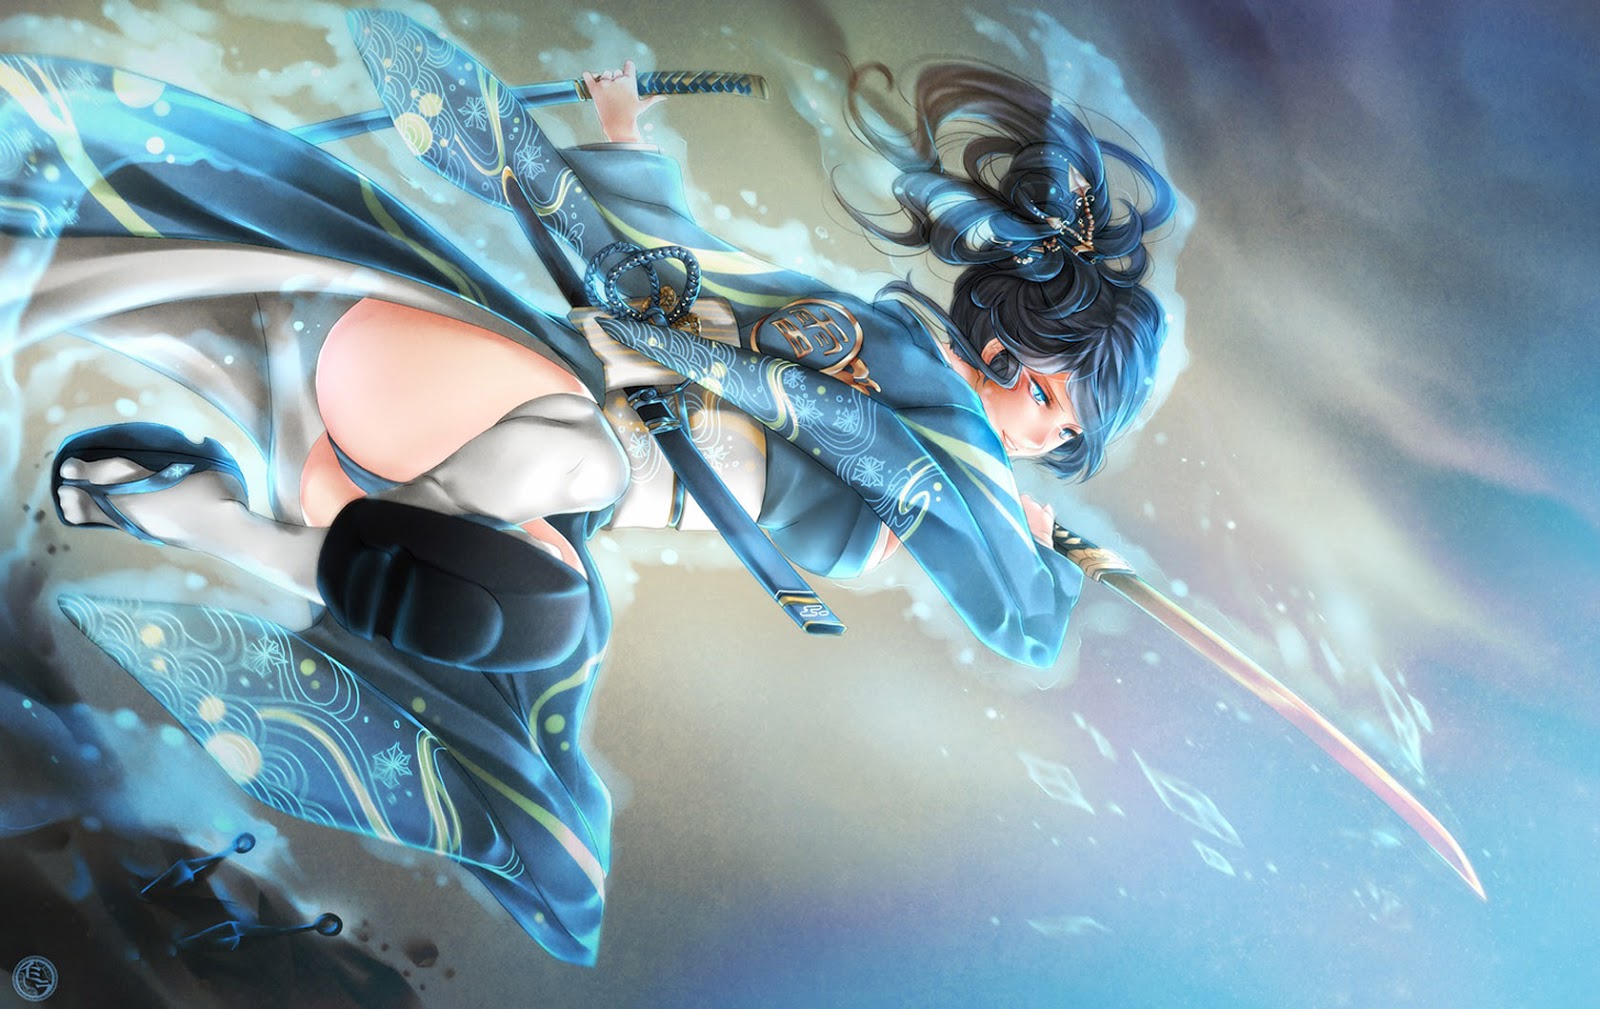 Ponytail Sword Weapon HD Wallpaper Background Image Photo Picture D3